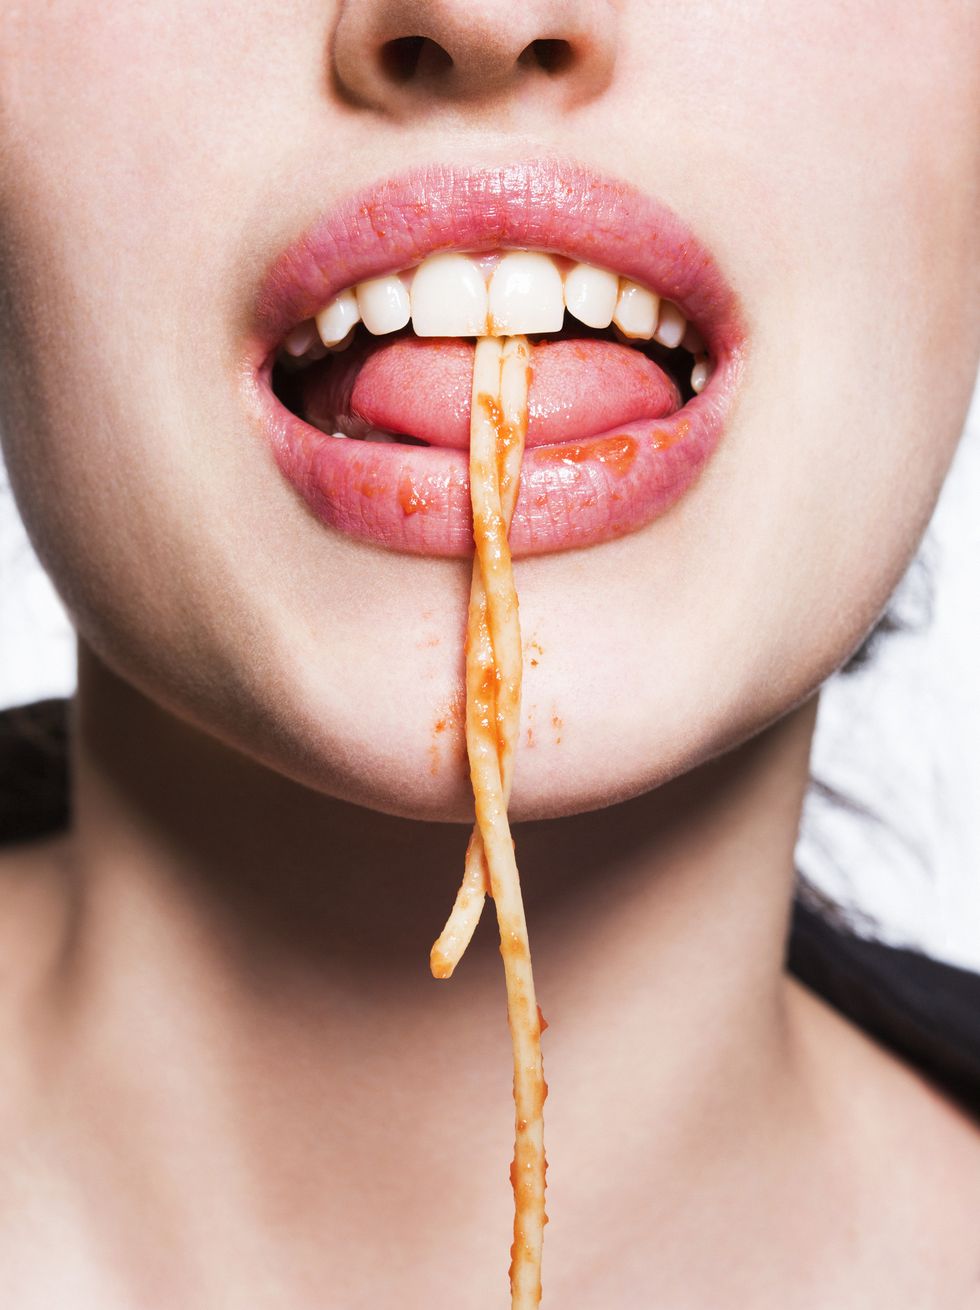 Spaghetti hanging from beauty model's mouth